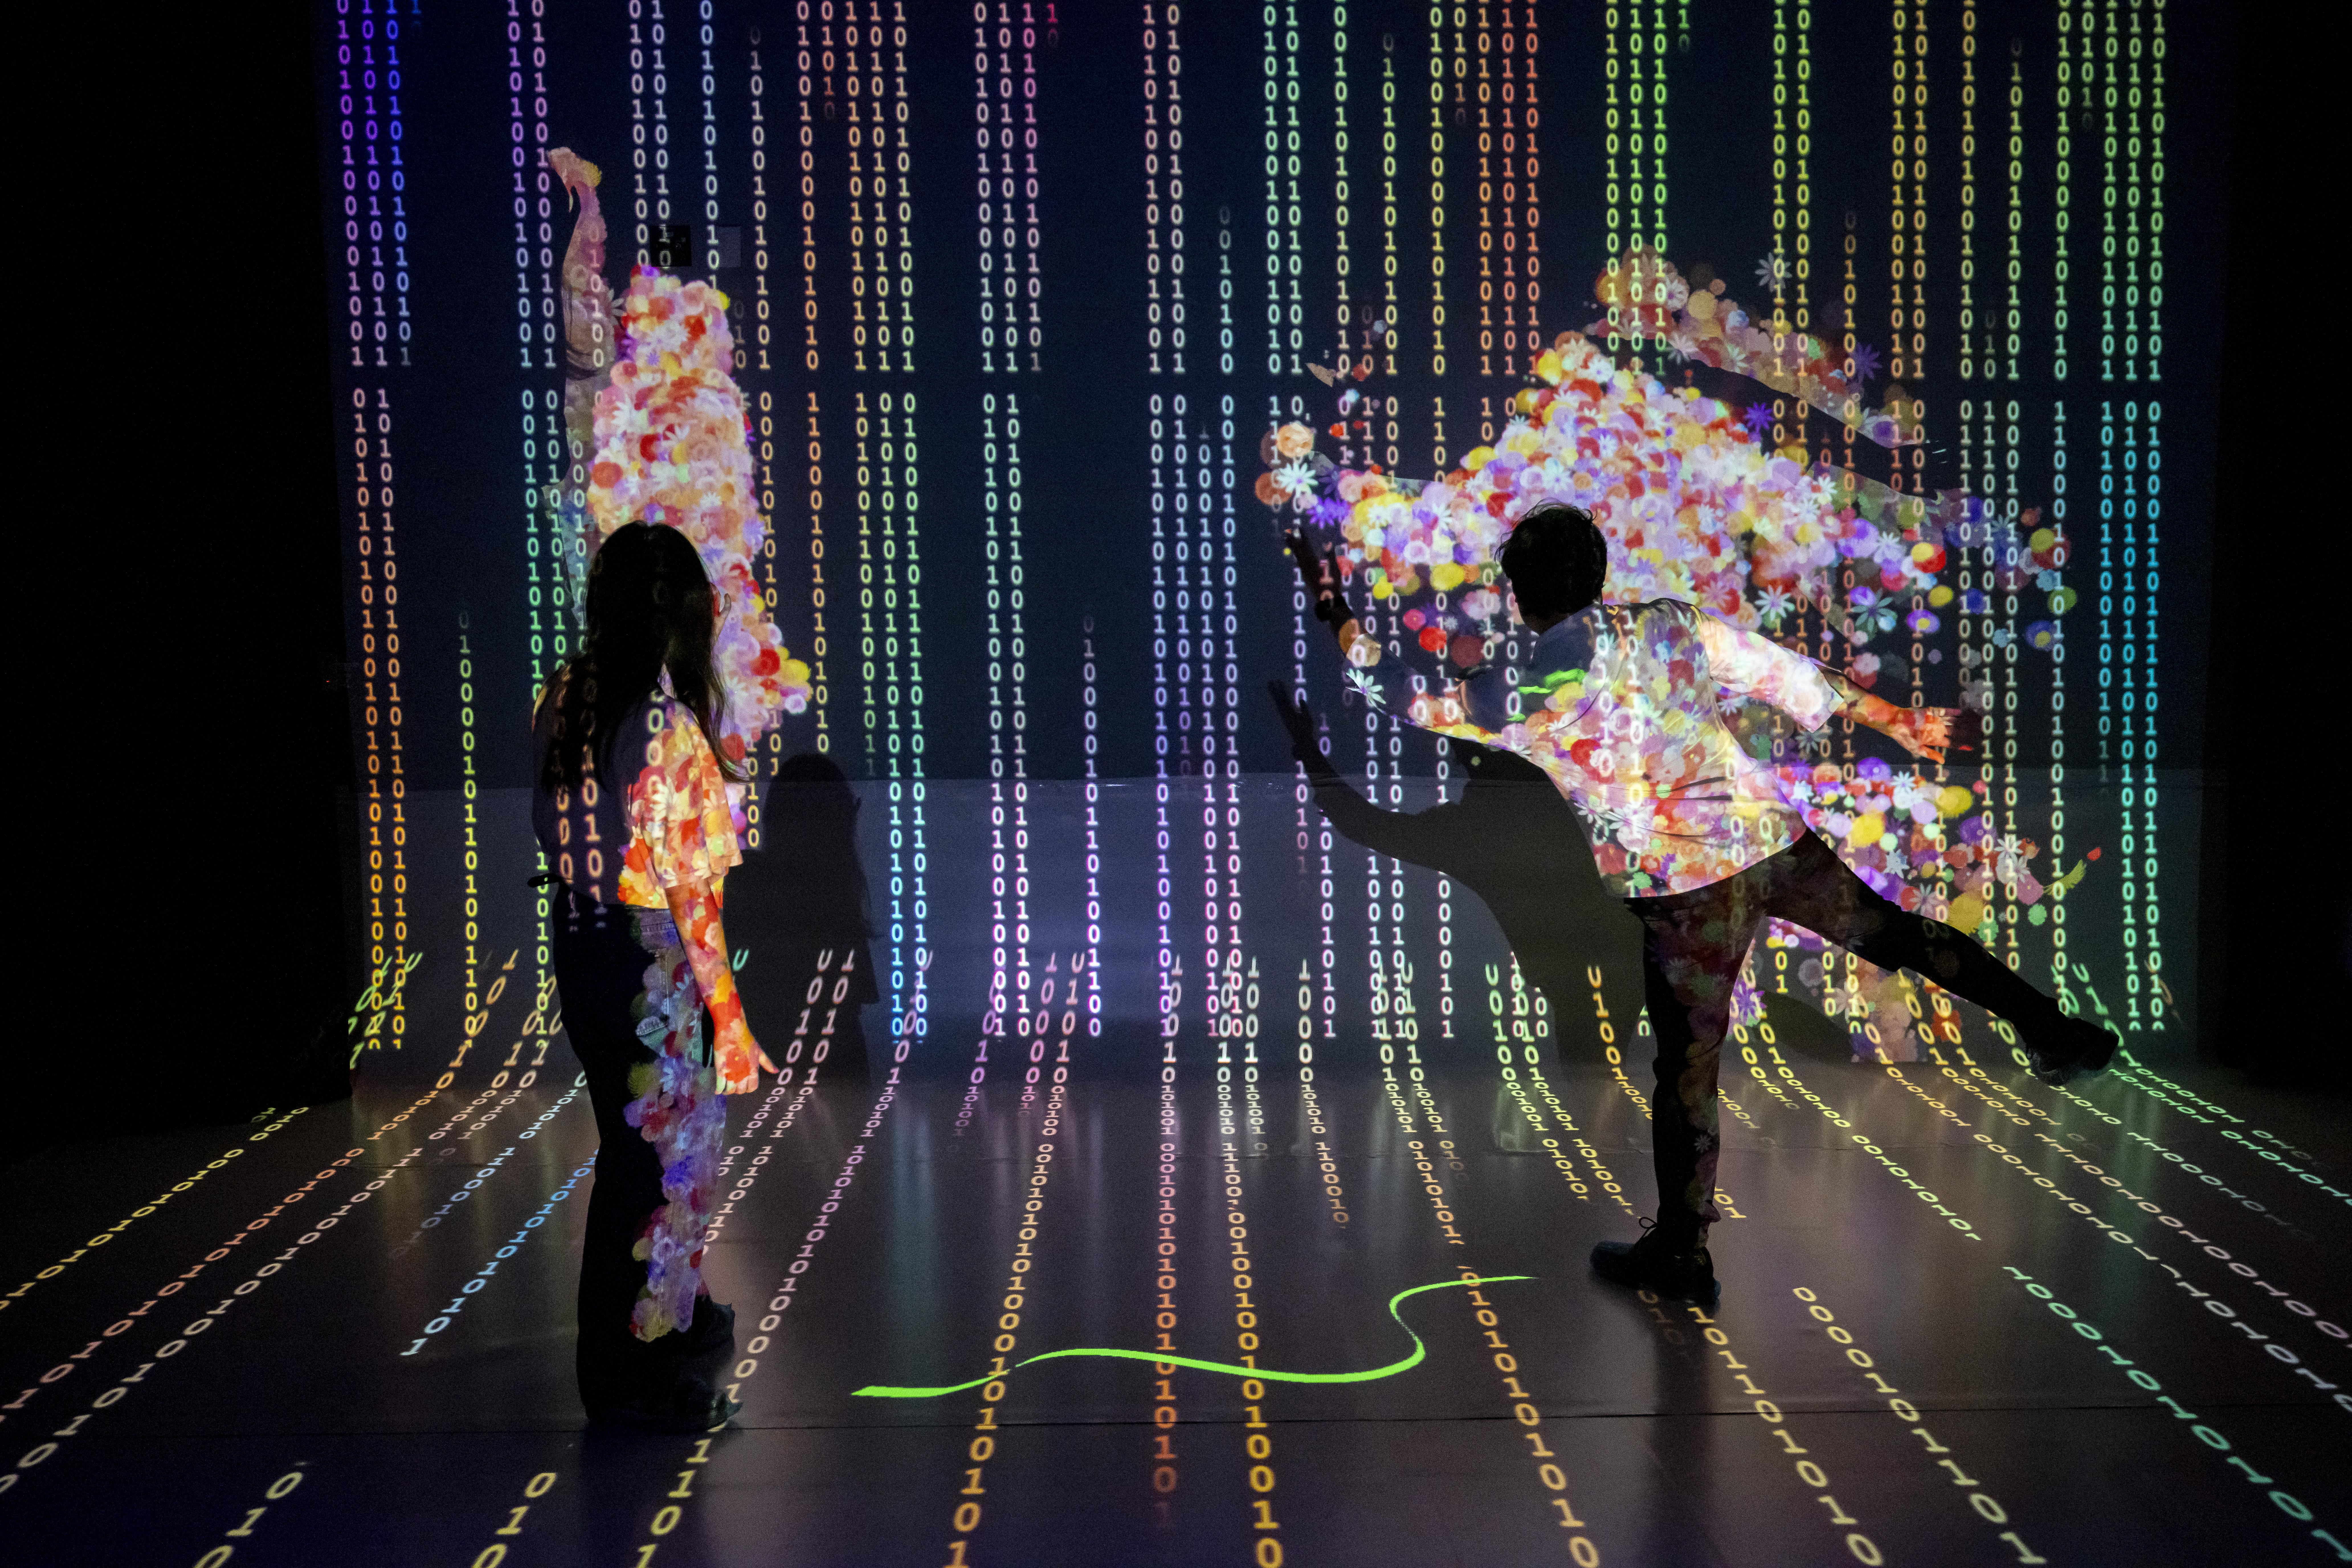 Two people interacting with an immersive projection piece on the wall and floor with pastel colors